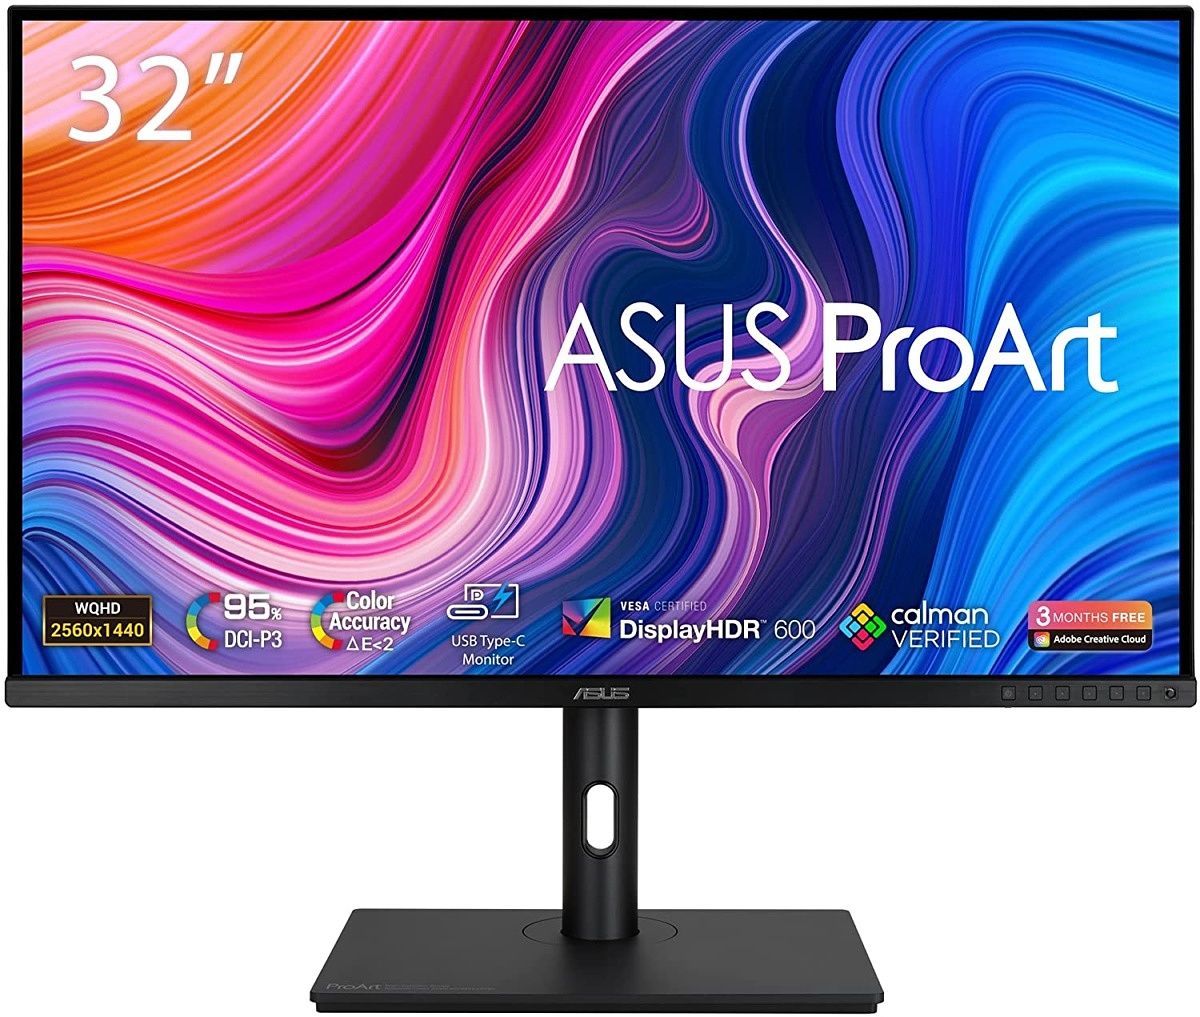 This ASUS ProArt monitor is extremely versatile, and it's relatively affordable for what you get. It's 32-inch Quad HD panel with 95% coverage of DCI-P3 and Delta E < 2, plus it supports DisplayHDR 600 and it has a 165Hz refresh rate, so you can use for work and gaming.